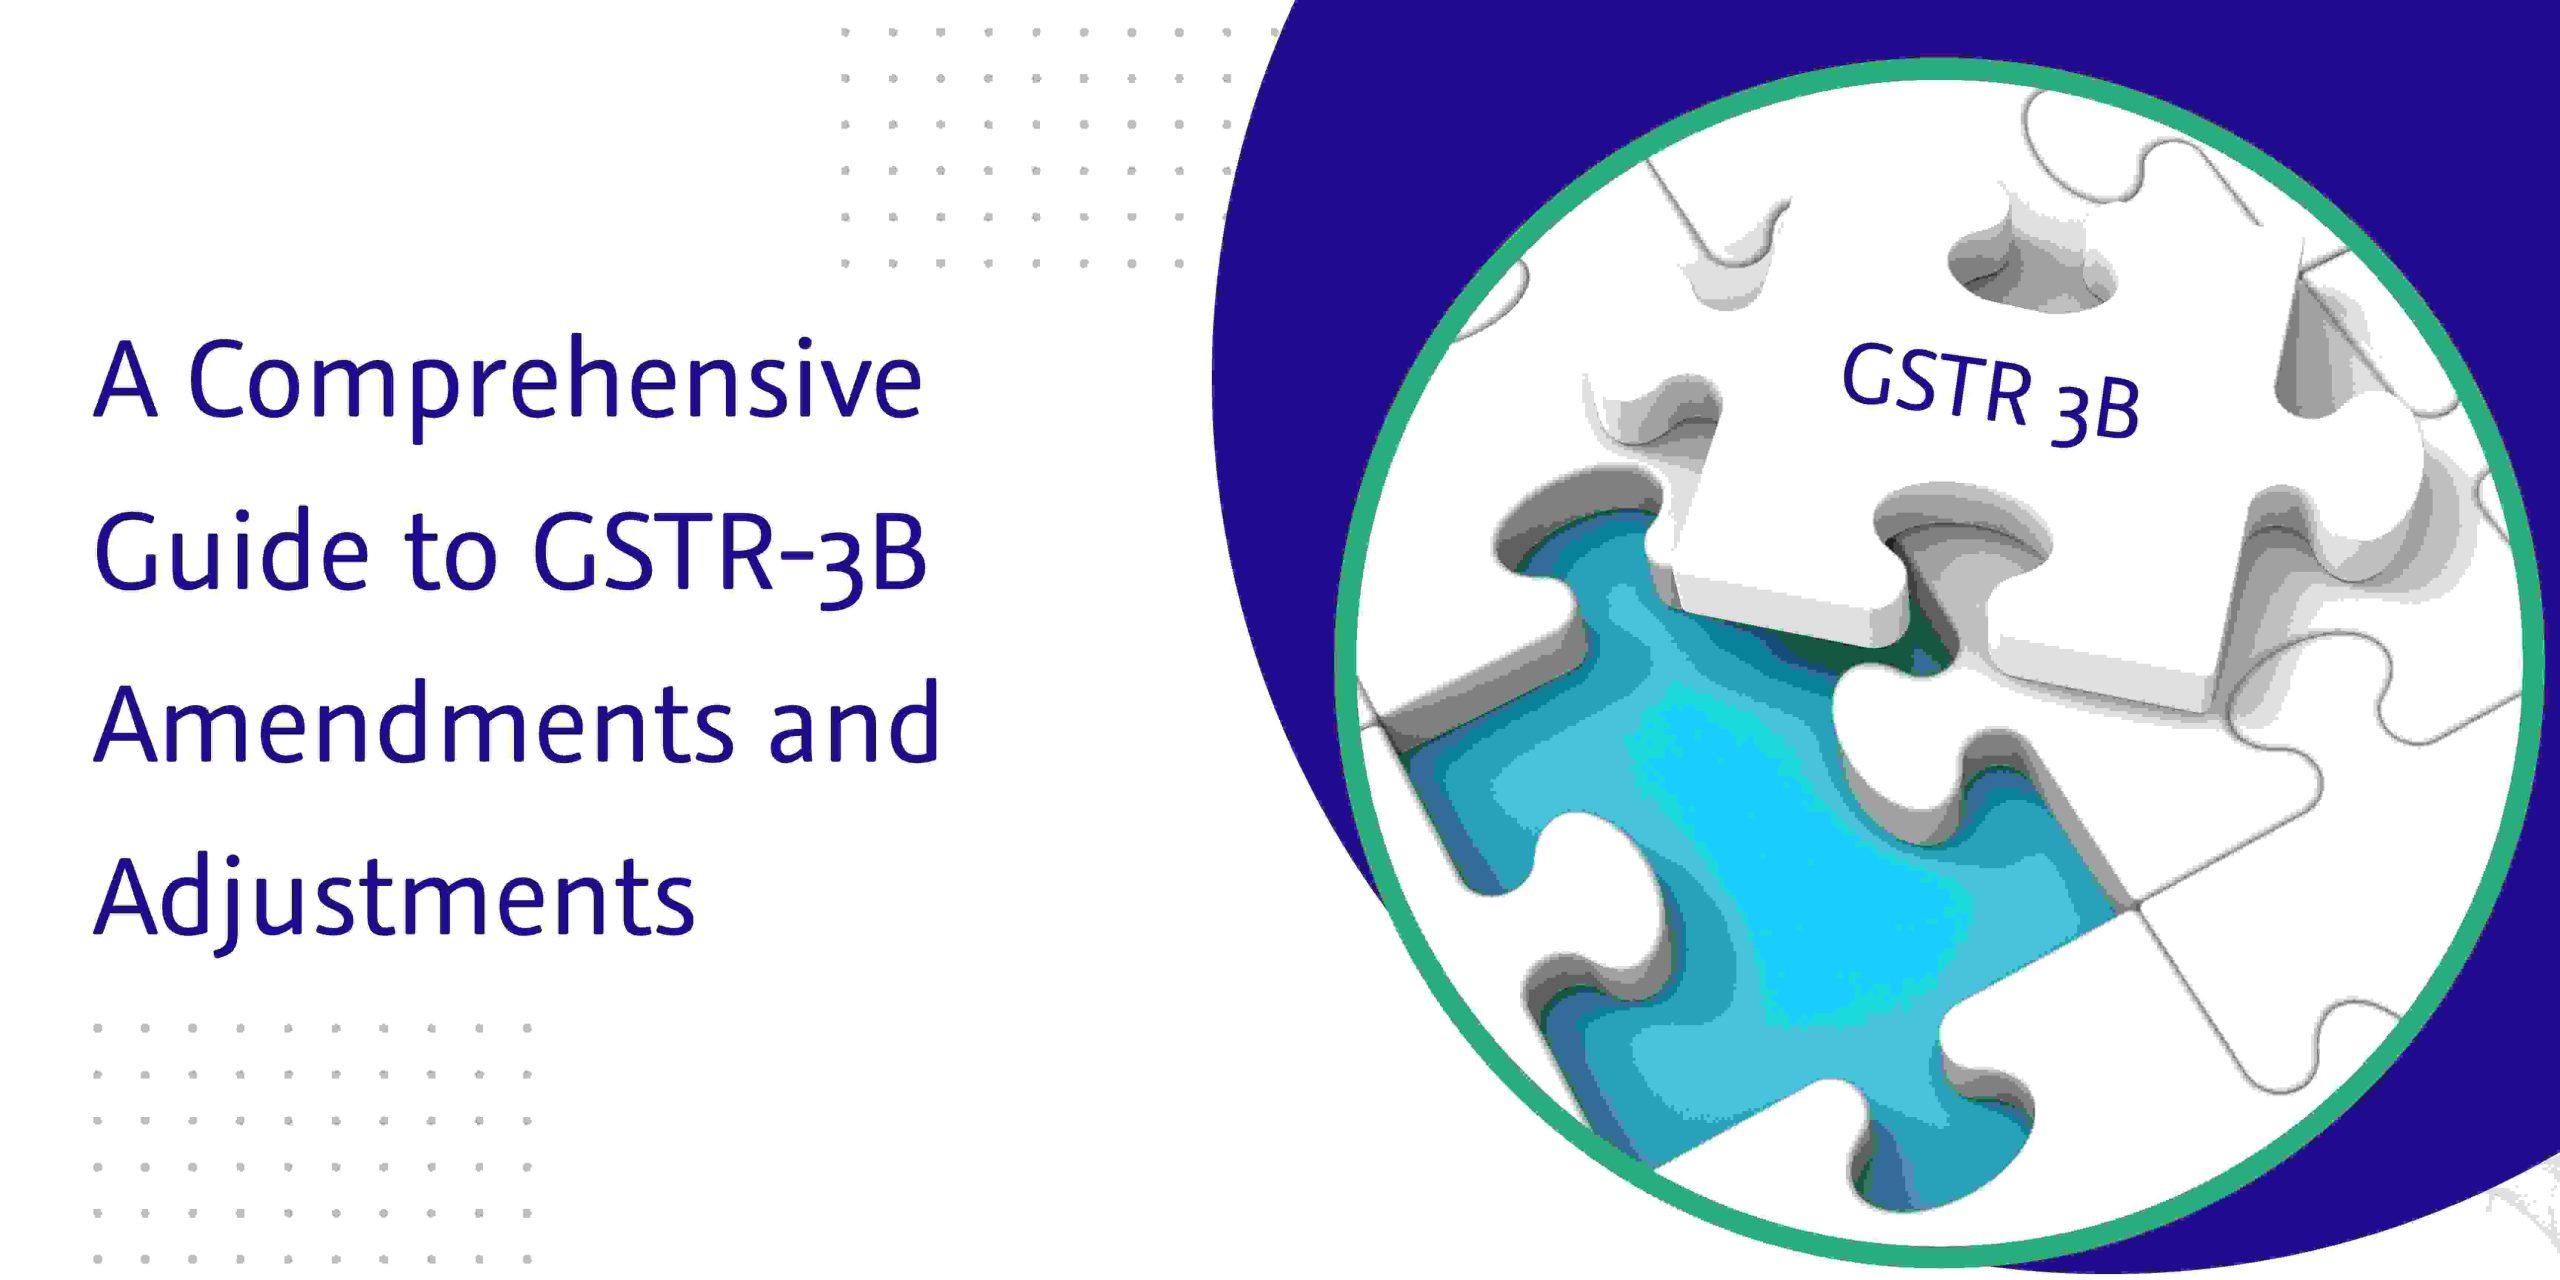 You are currently viewing A Comprehensive Guide to GSTR-3B Amendments and Adjustments